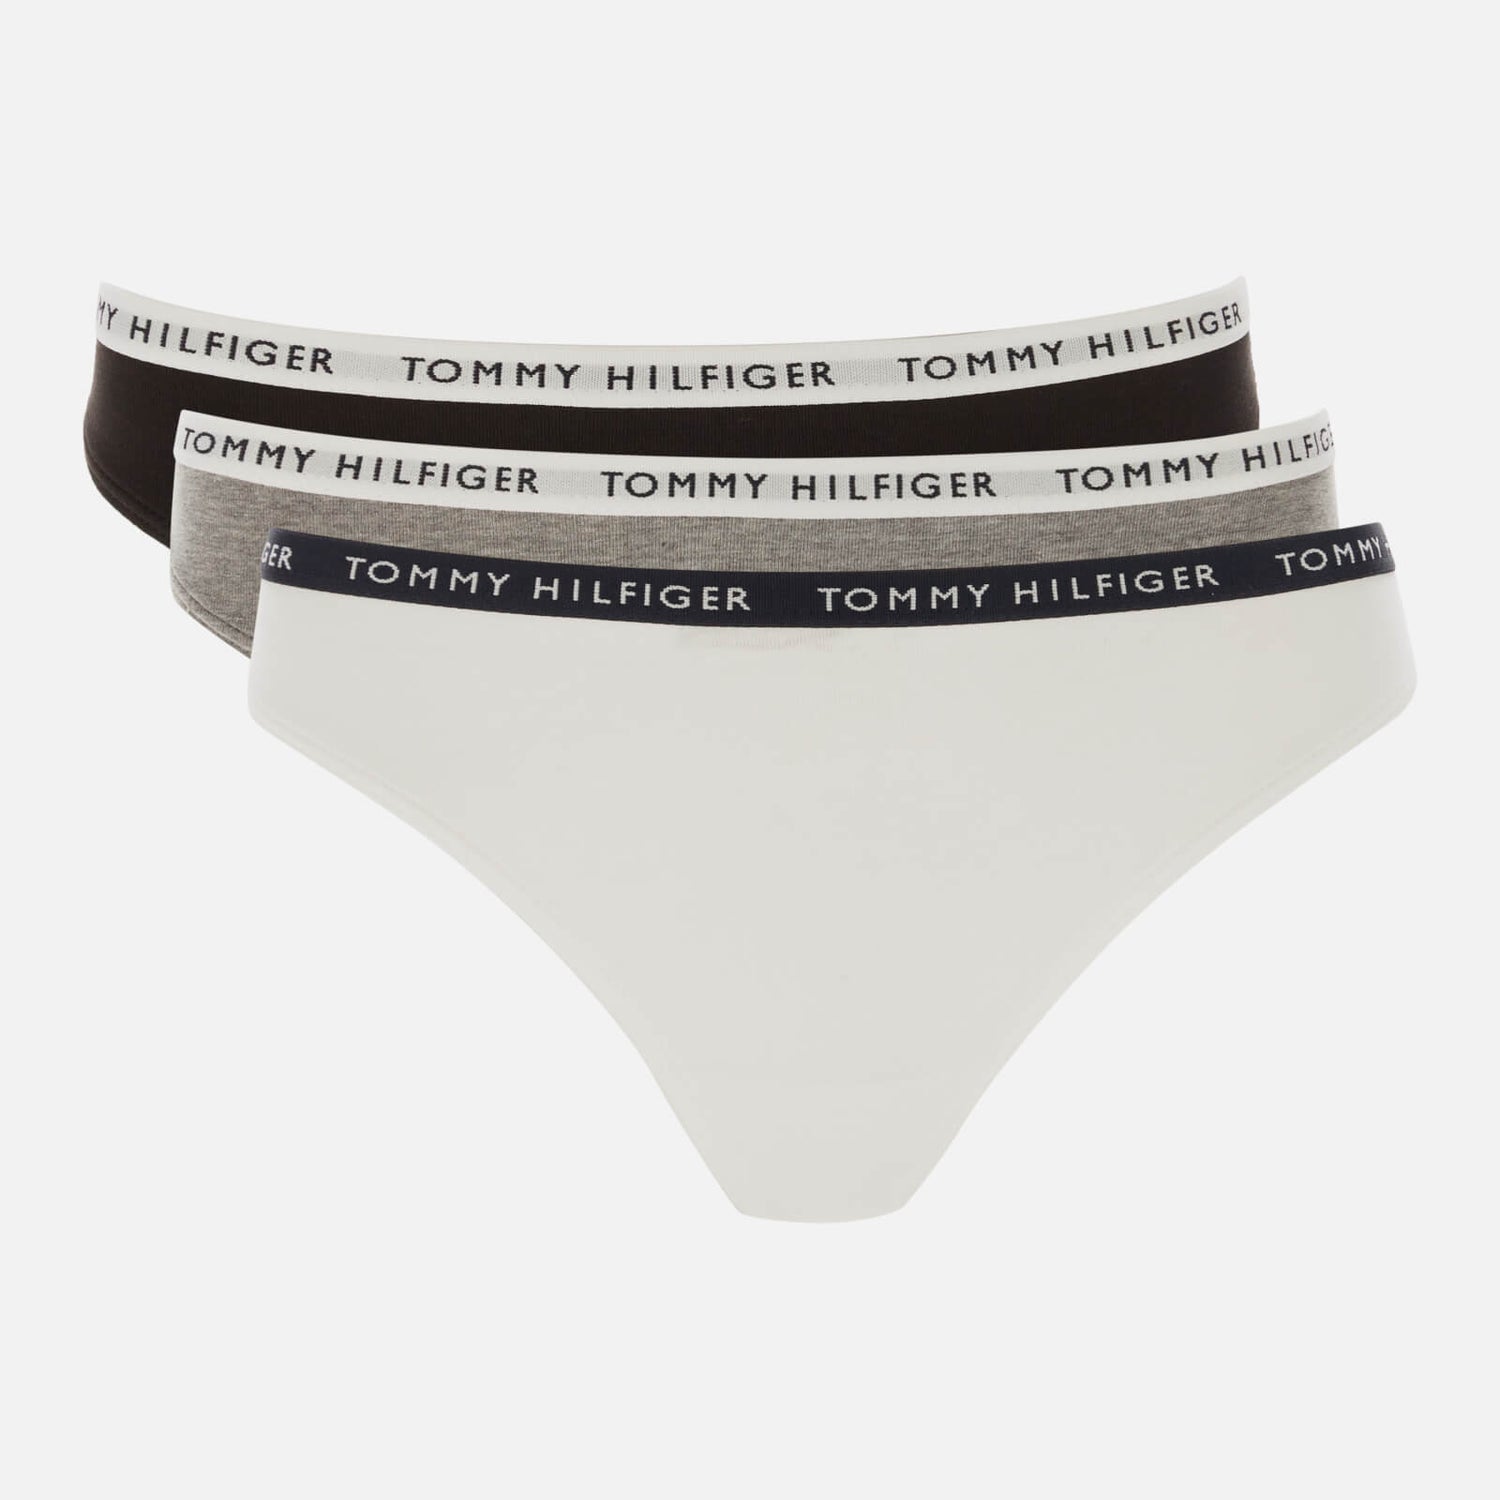 Tommy Hilfiger Women's Recycled 3P Thong - Grey/White/Black - XS